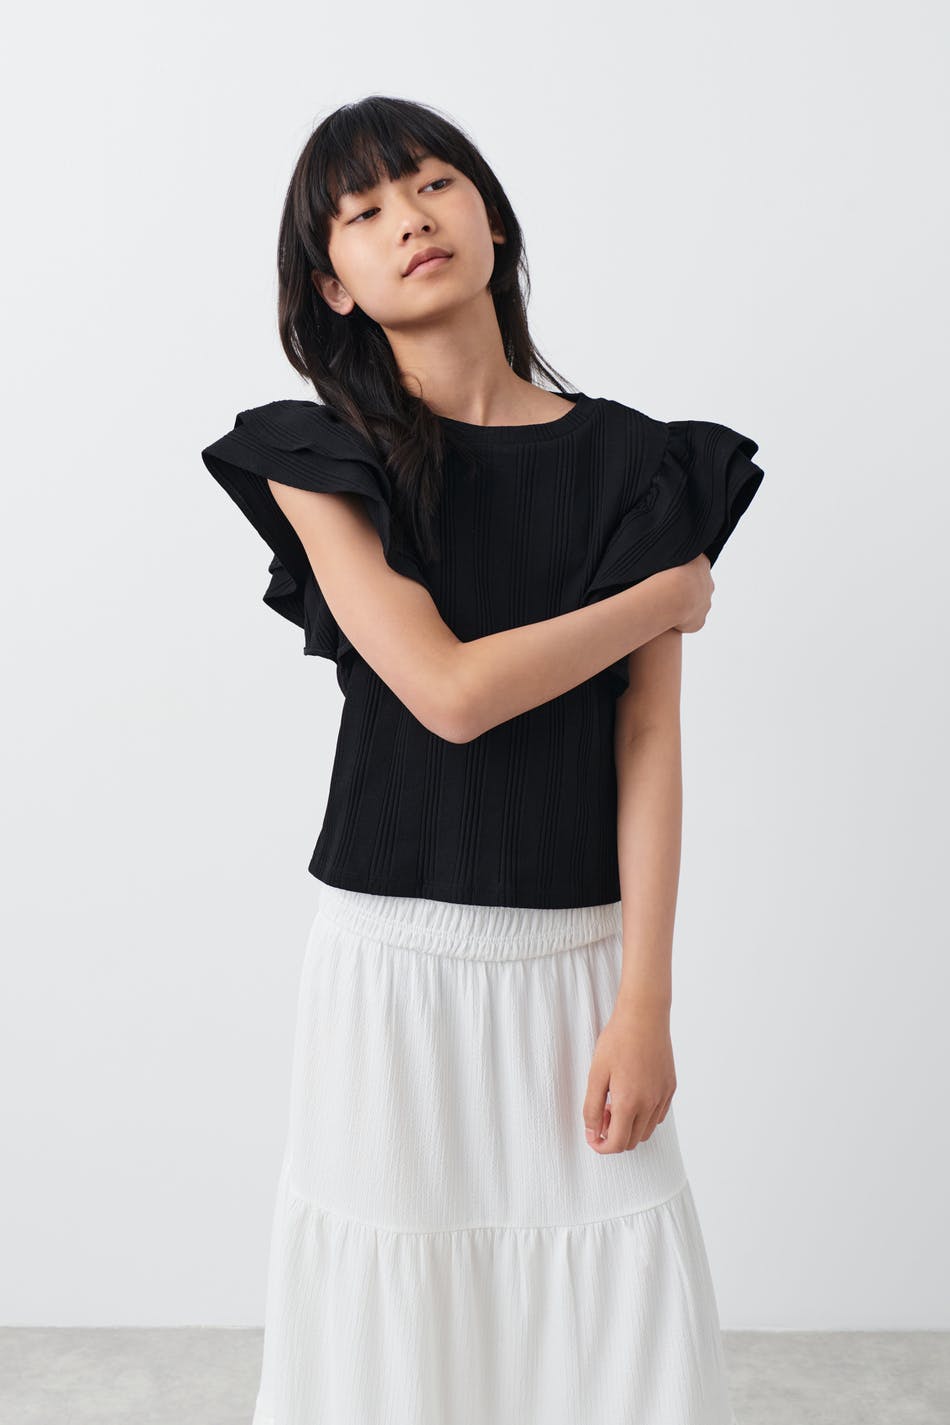 Gina Tricot - Y double frill top - young-tops - Black - 158/164 - Female